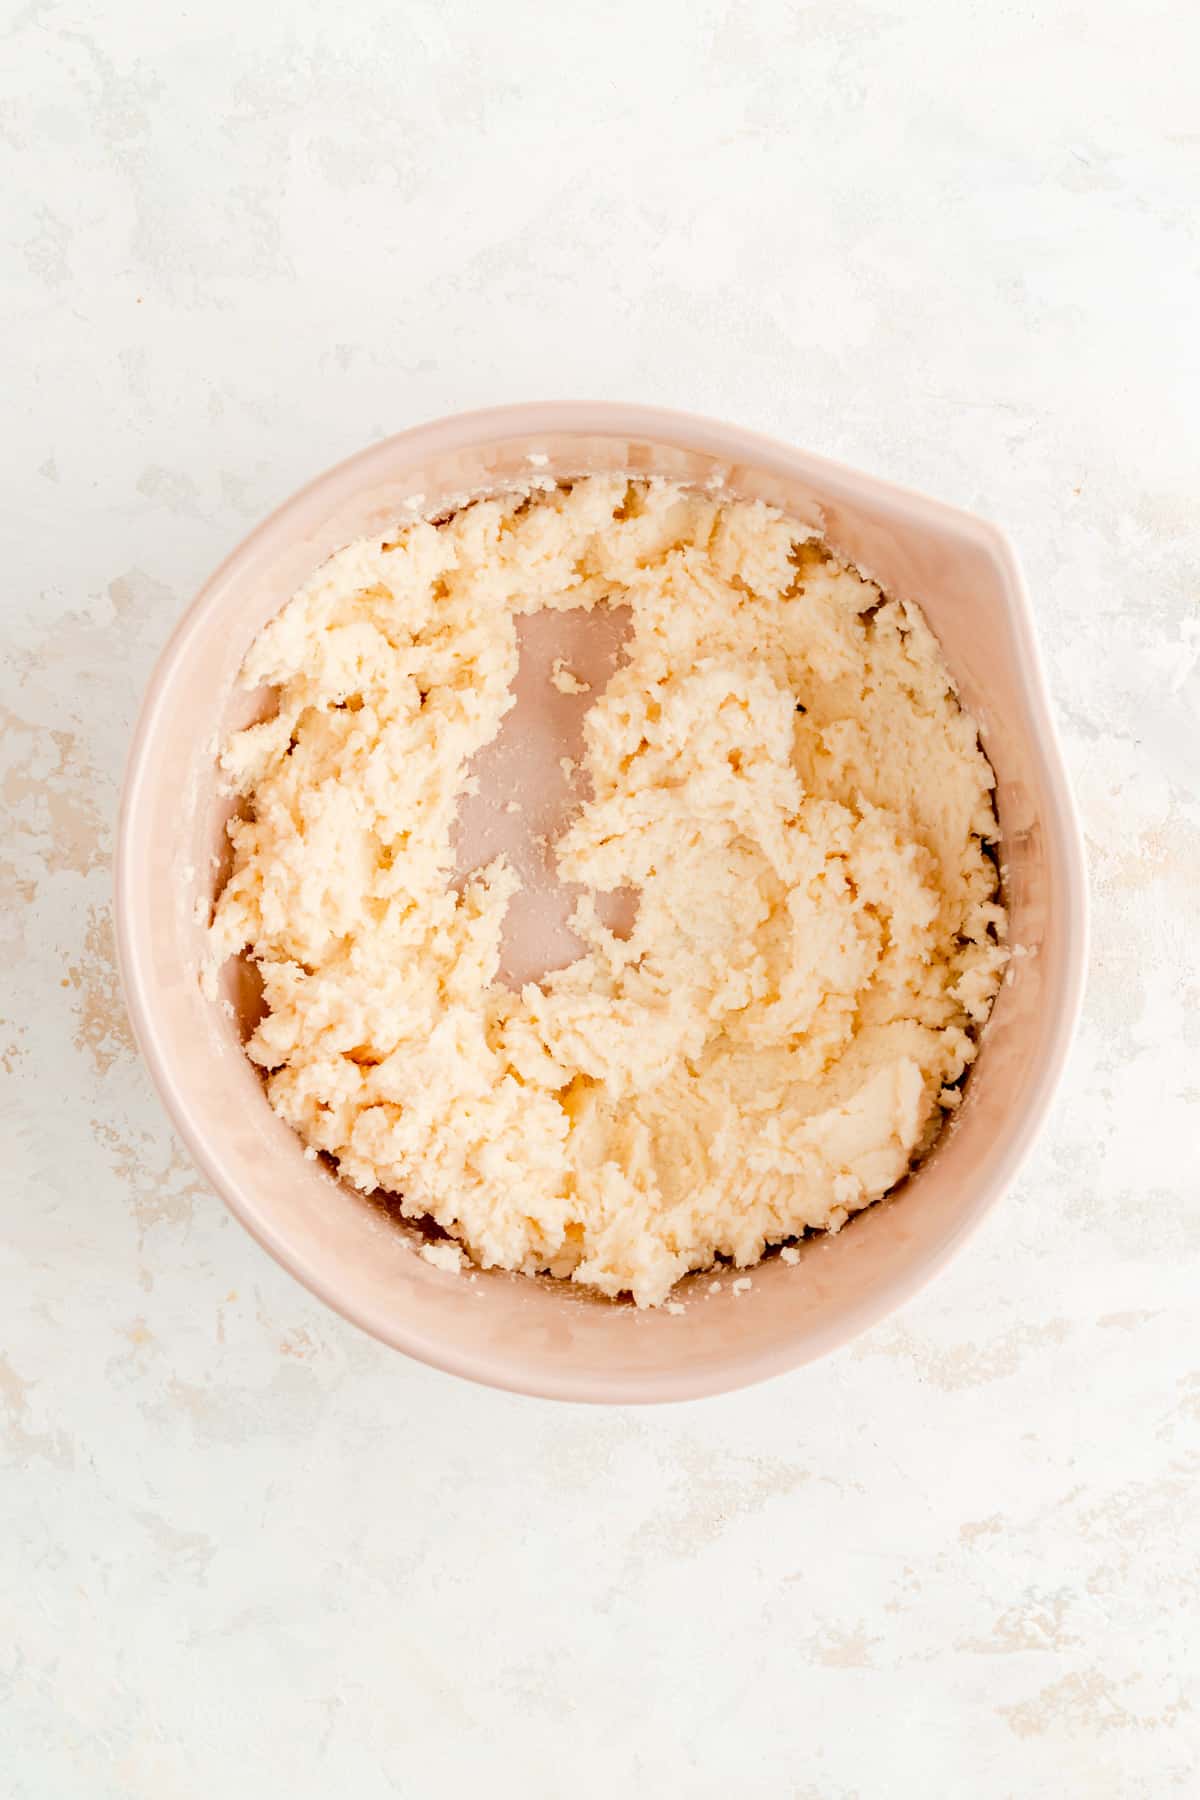 creamed butter and sugar in a tan bowl on white background.